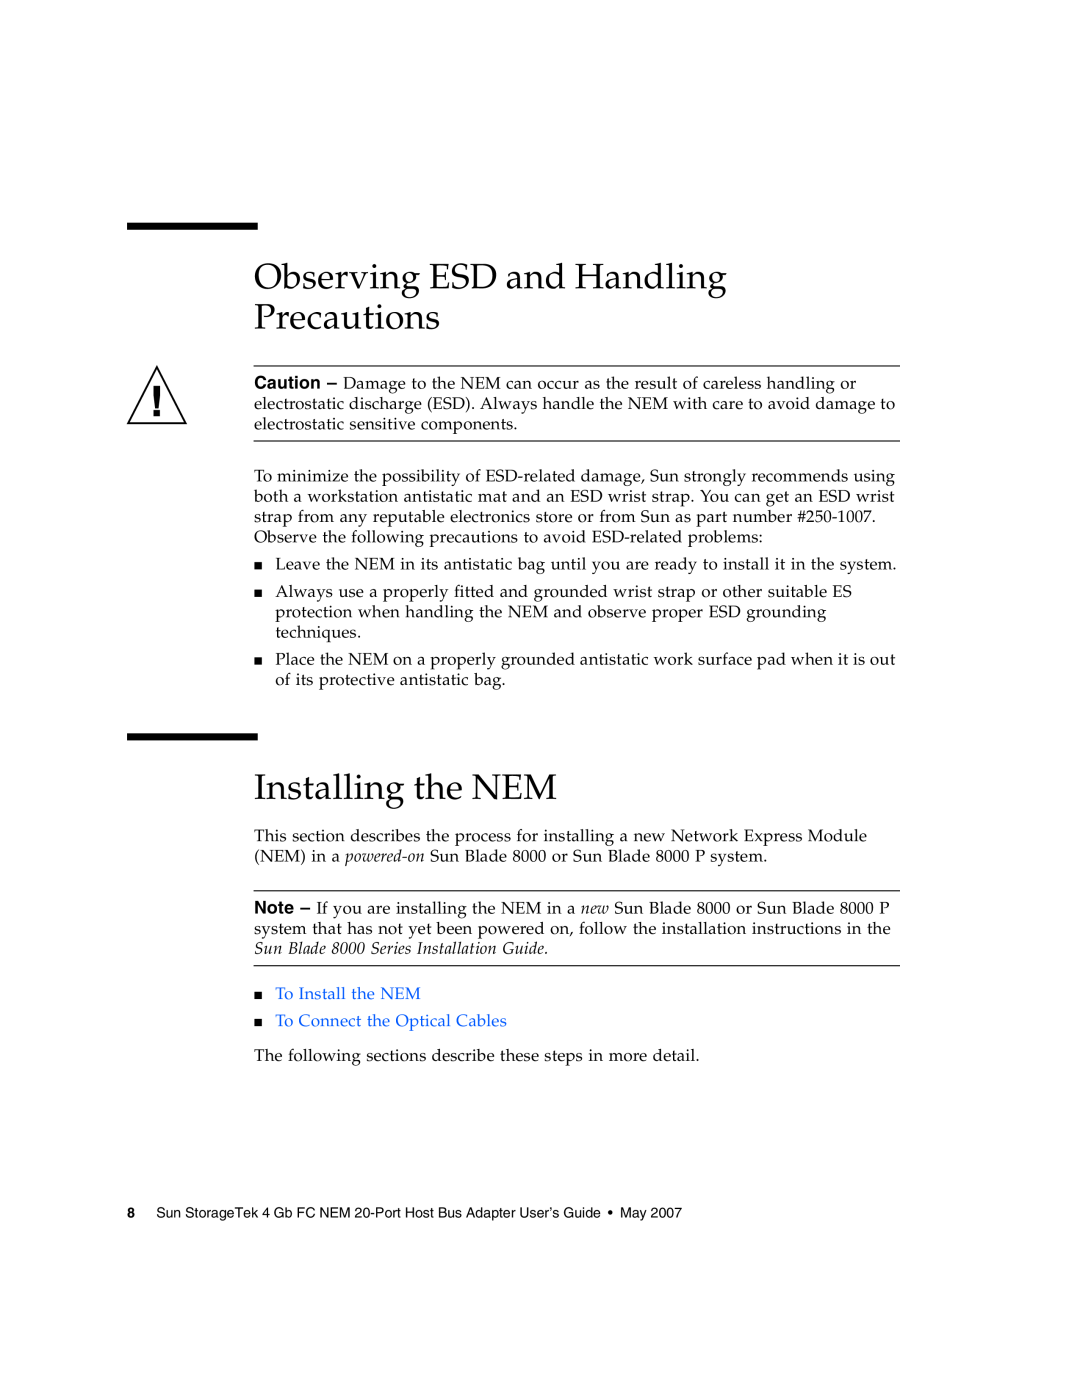 Sun Microsystems 2.0 manual Observing ESD and Handling Precautions, Installing the NEM 